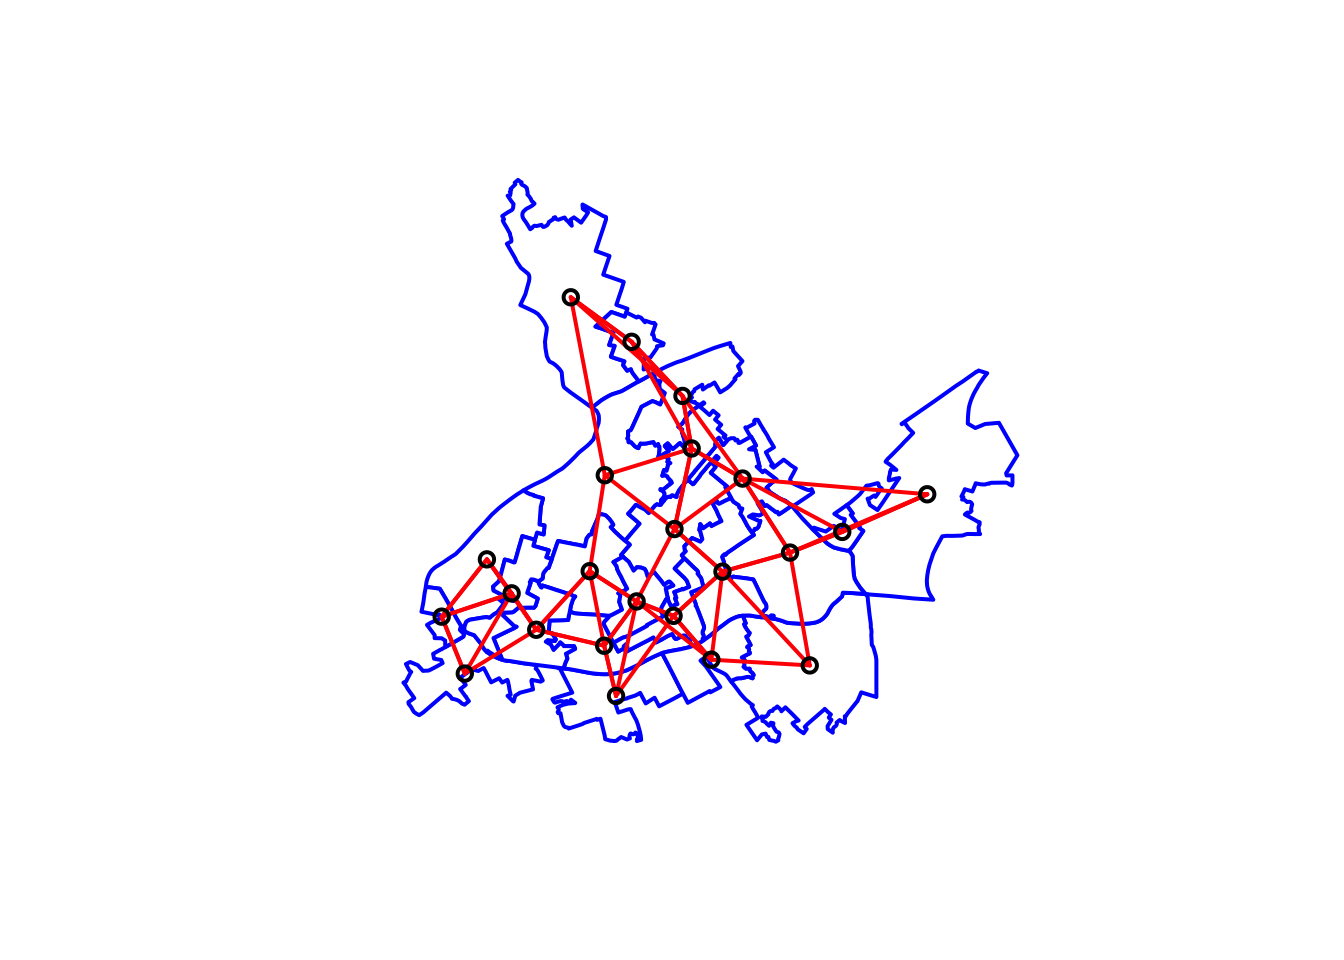 Once again we have LSOAs from Manchester outlined in blue, with a small black circle in the centre of each one. Some more connections are present compared to the previous figure, and in particular the far north and east LSOAs all have three red lines originating from them. Some of these connect LSOAs which are not bordering.